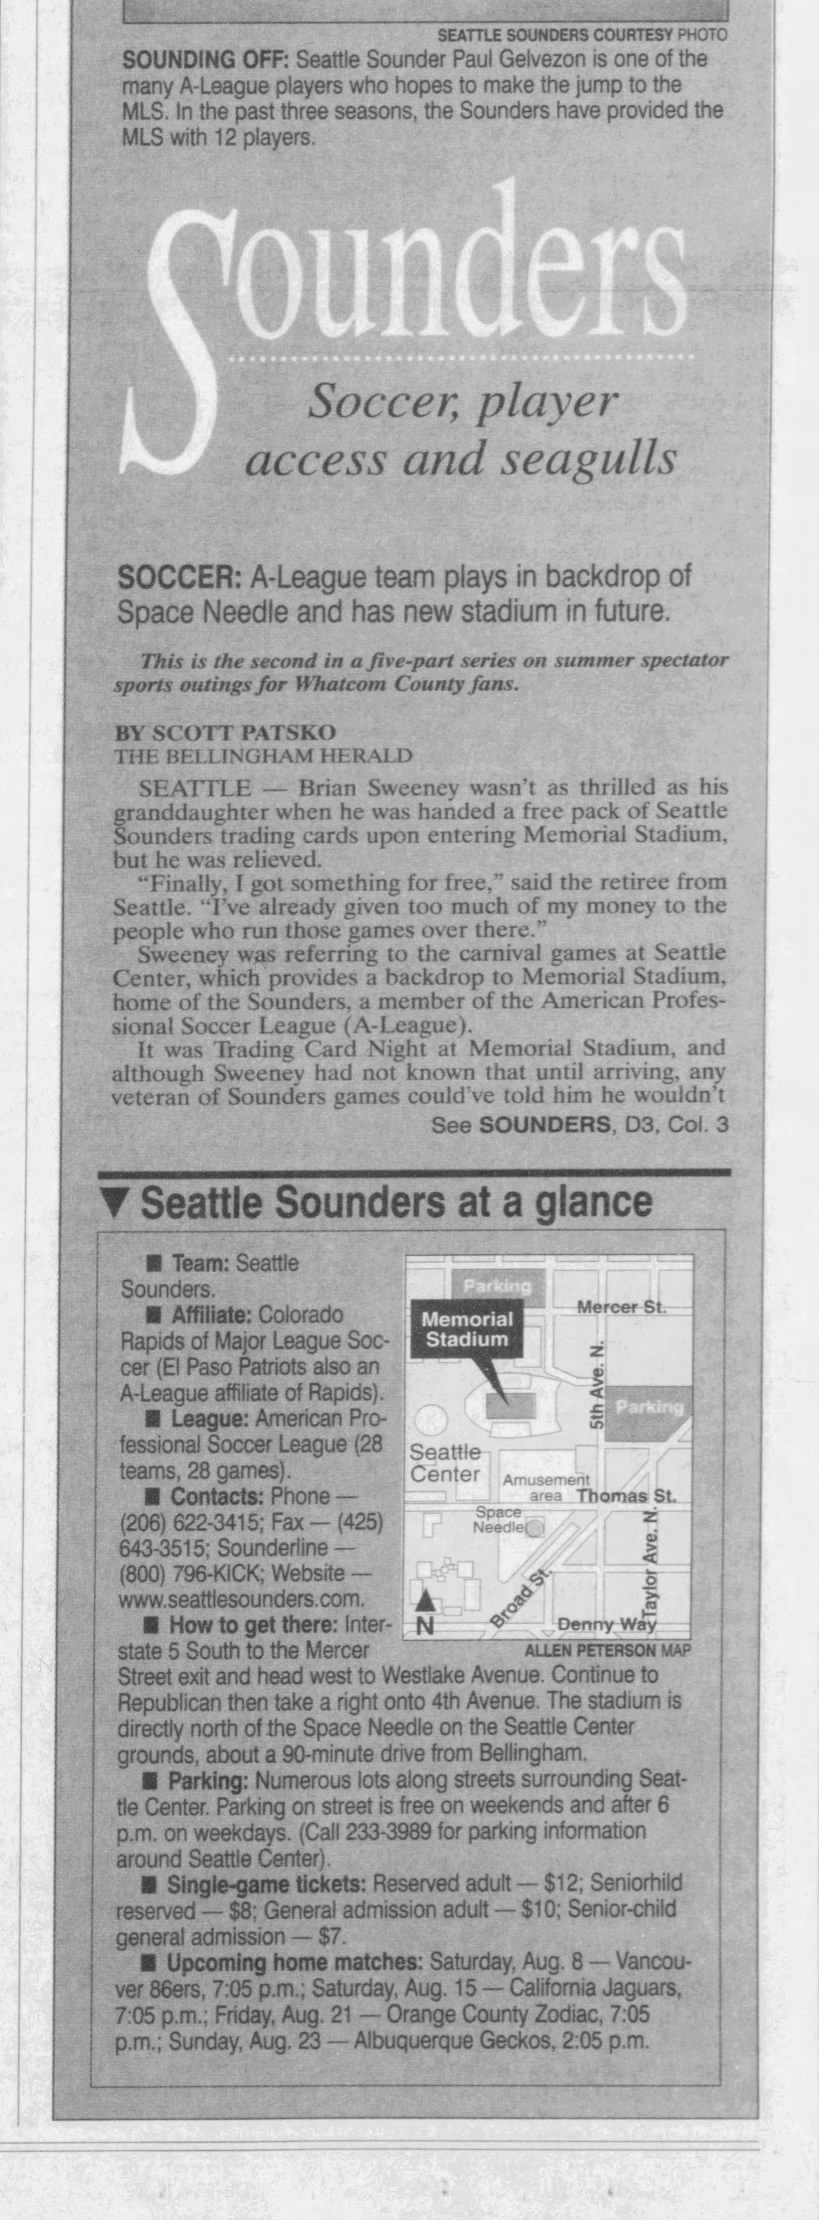 Sounders: Soccer, player access and seagulls